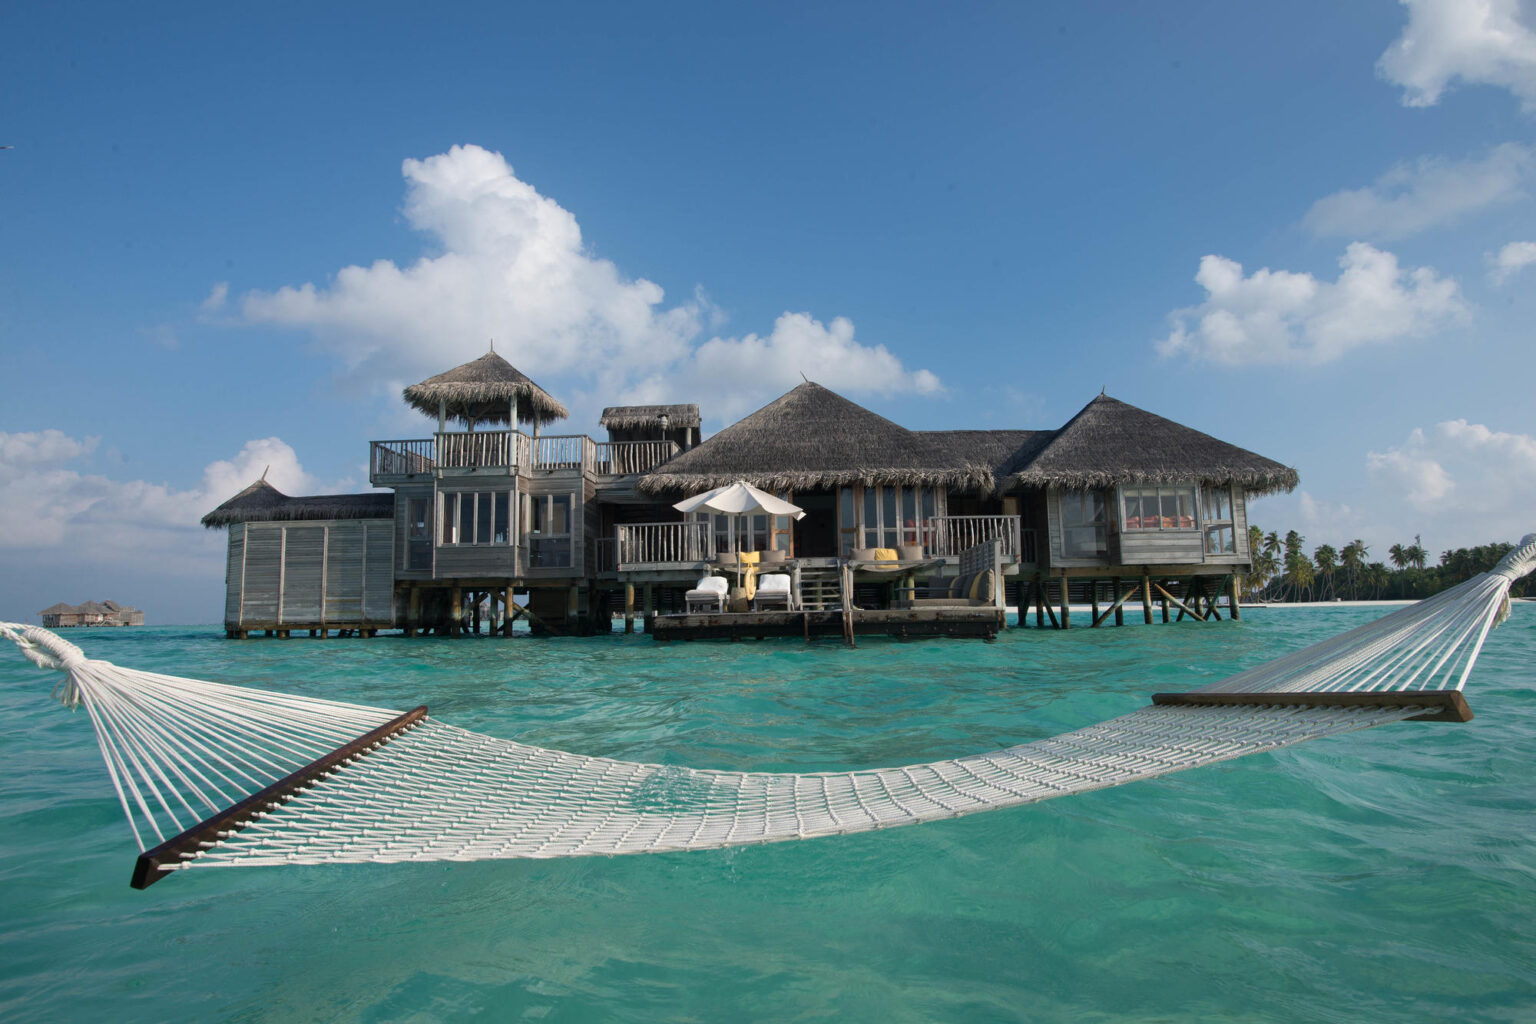 14 Incredible Overwater Bungalows in the Maldives | Oyster.com